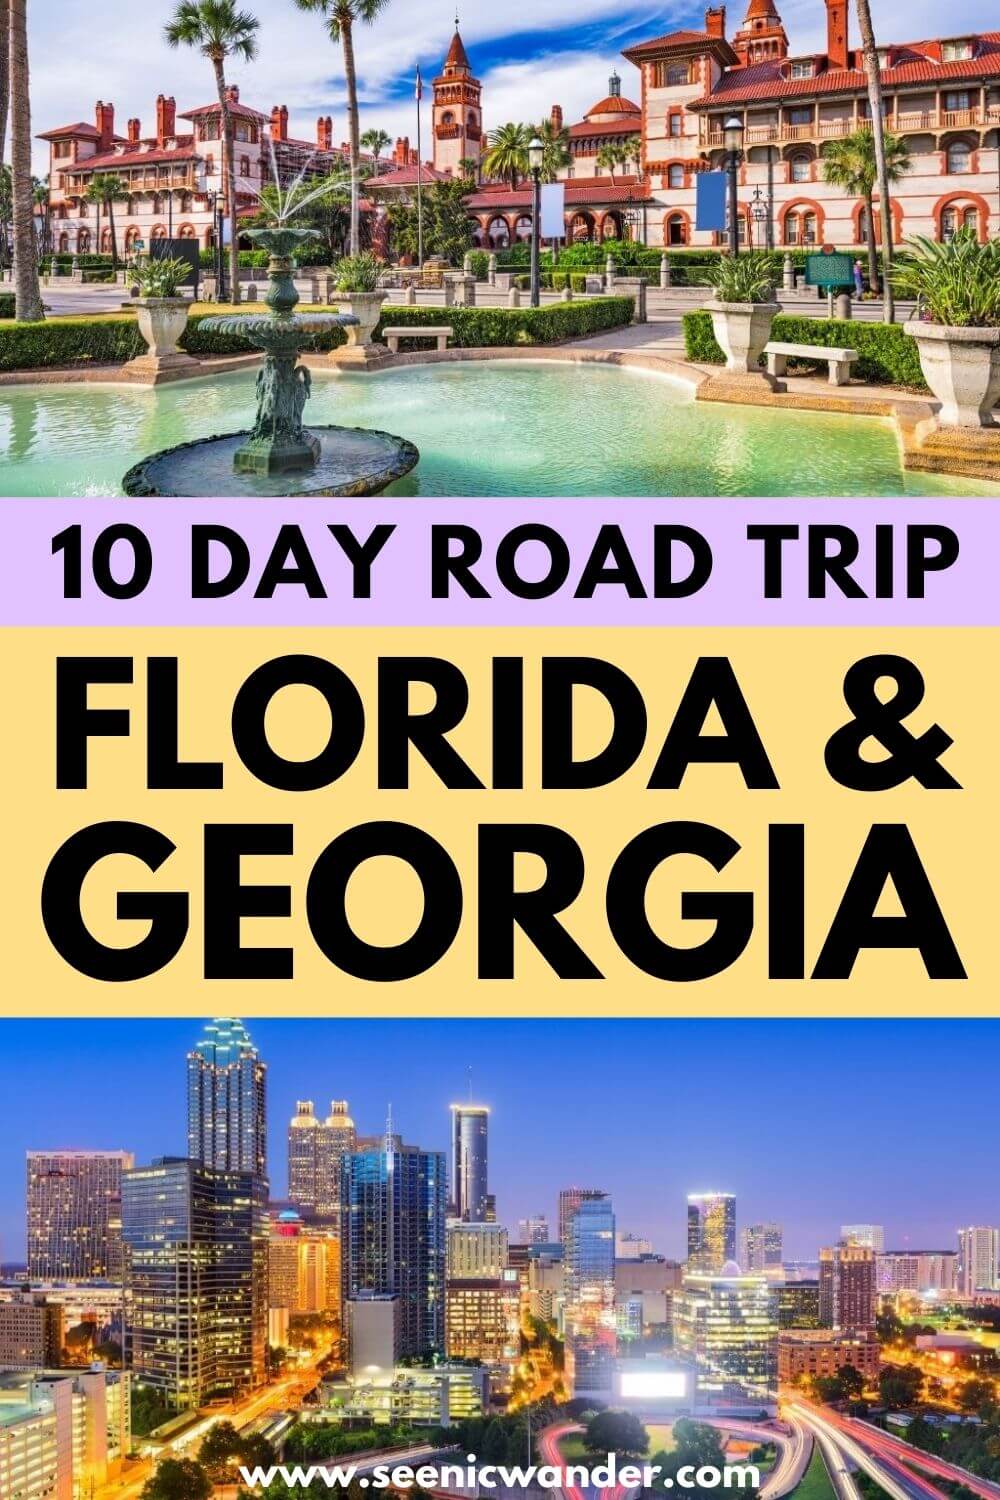 day trips to georgia from florida